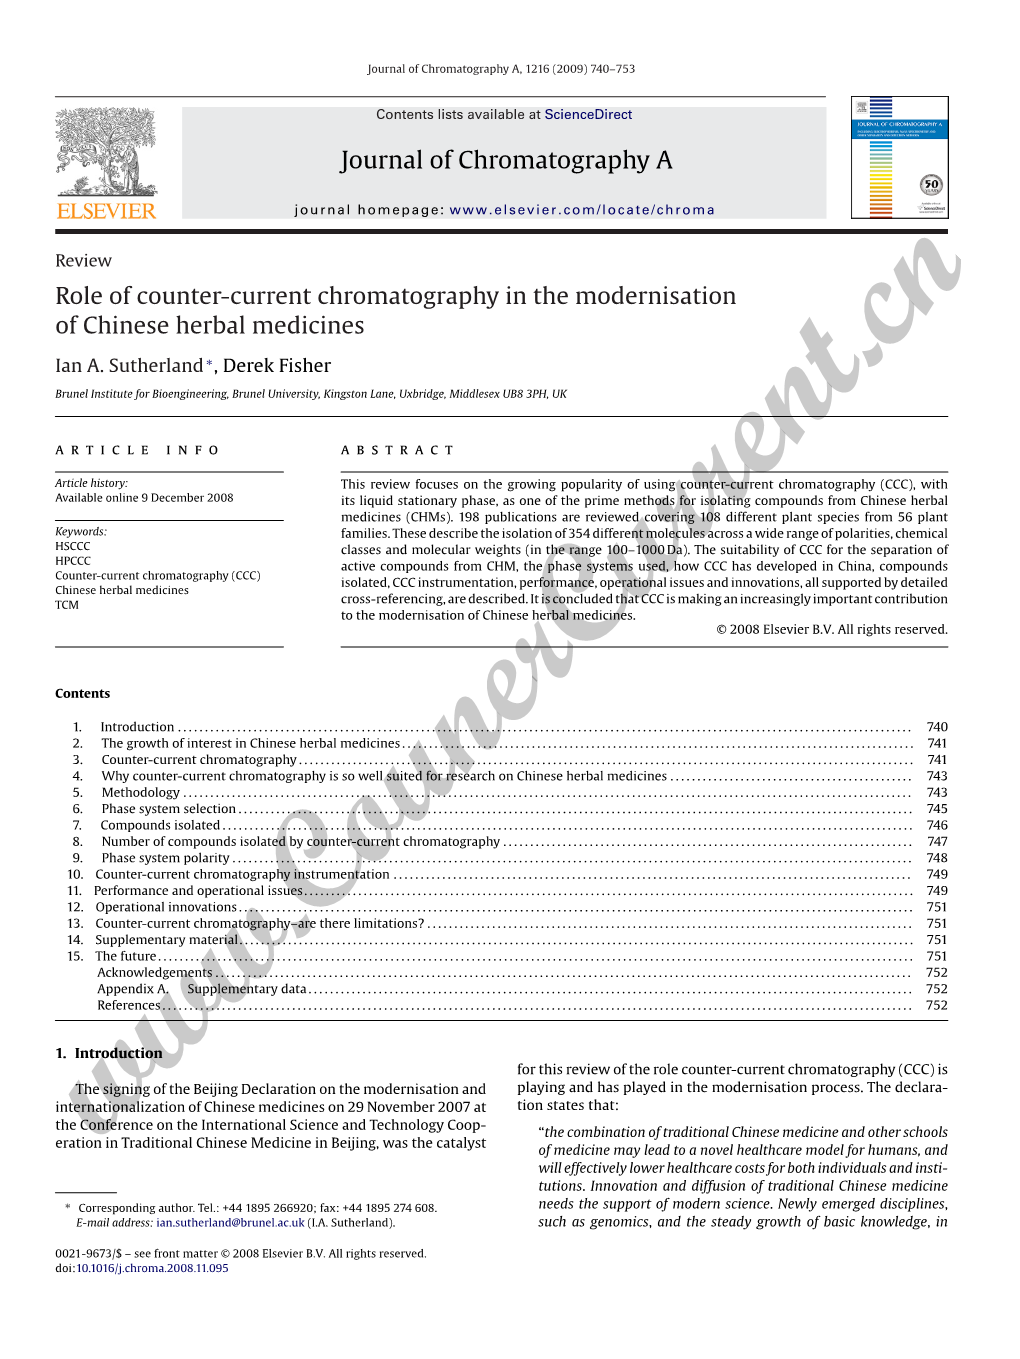 Journal of Chromatography a Role of Counter-Current Chromatography In